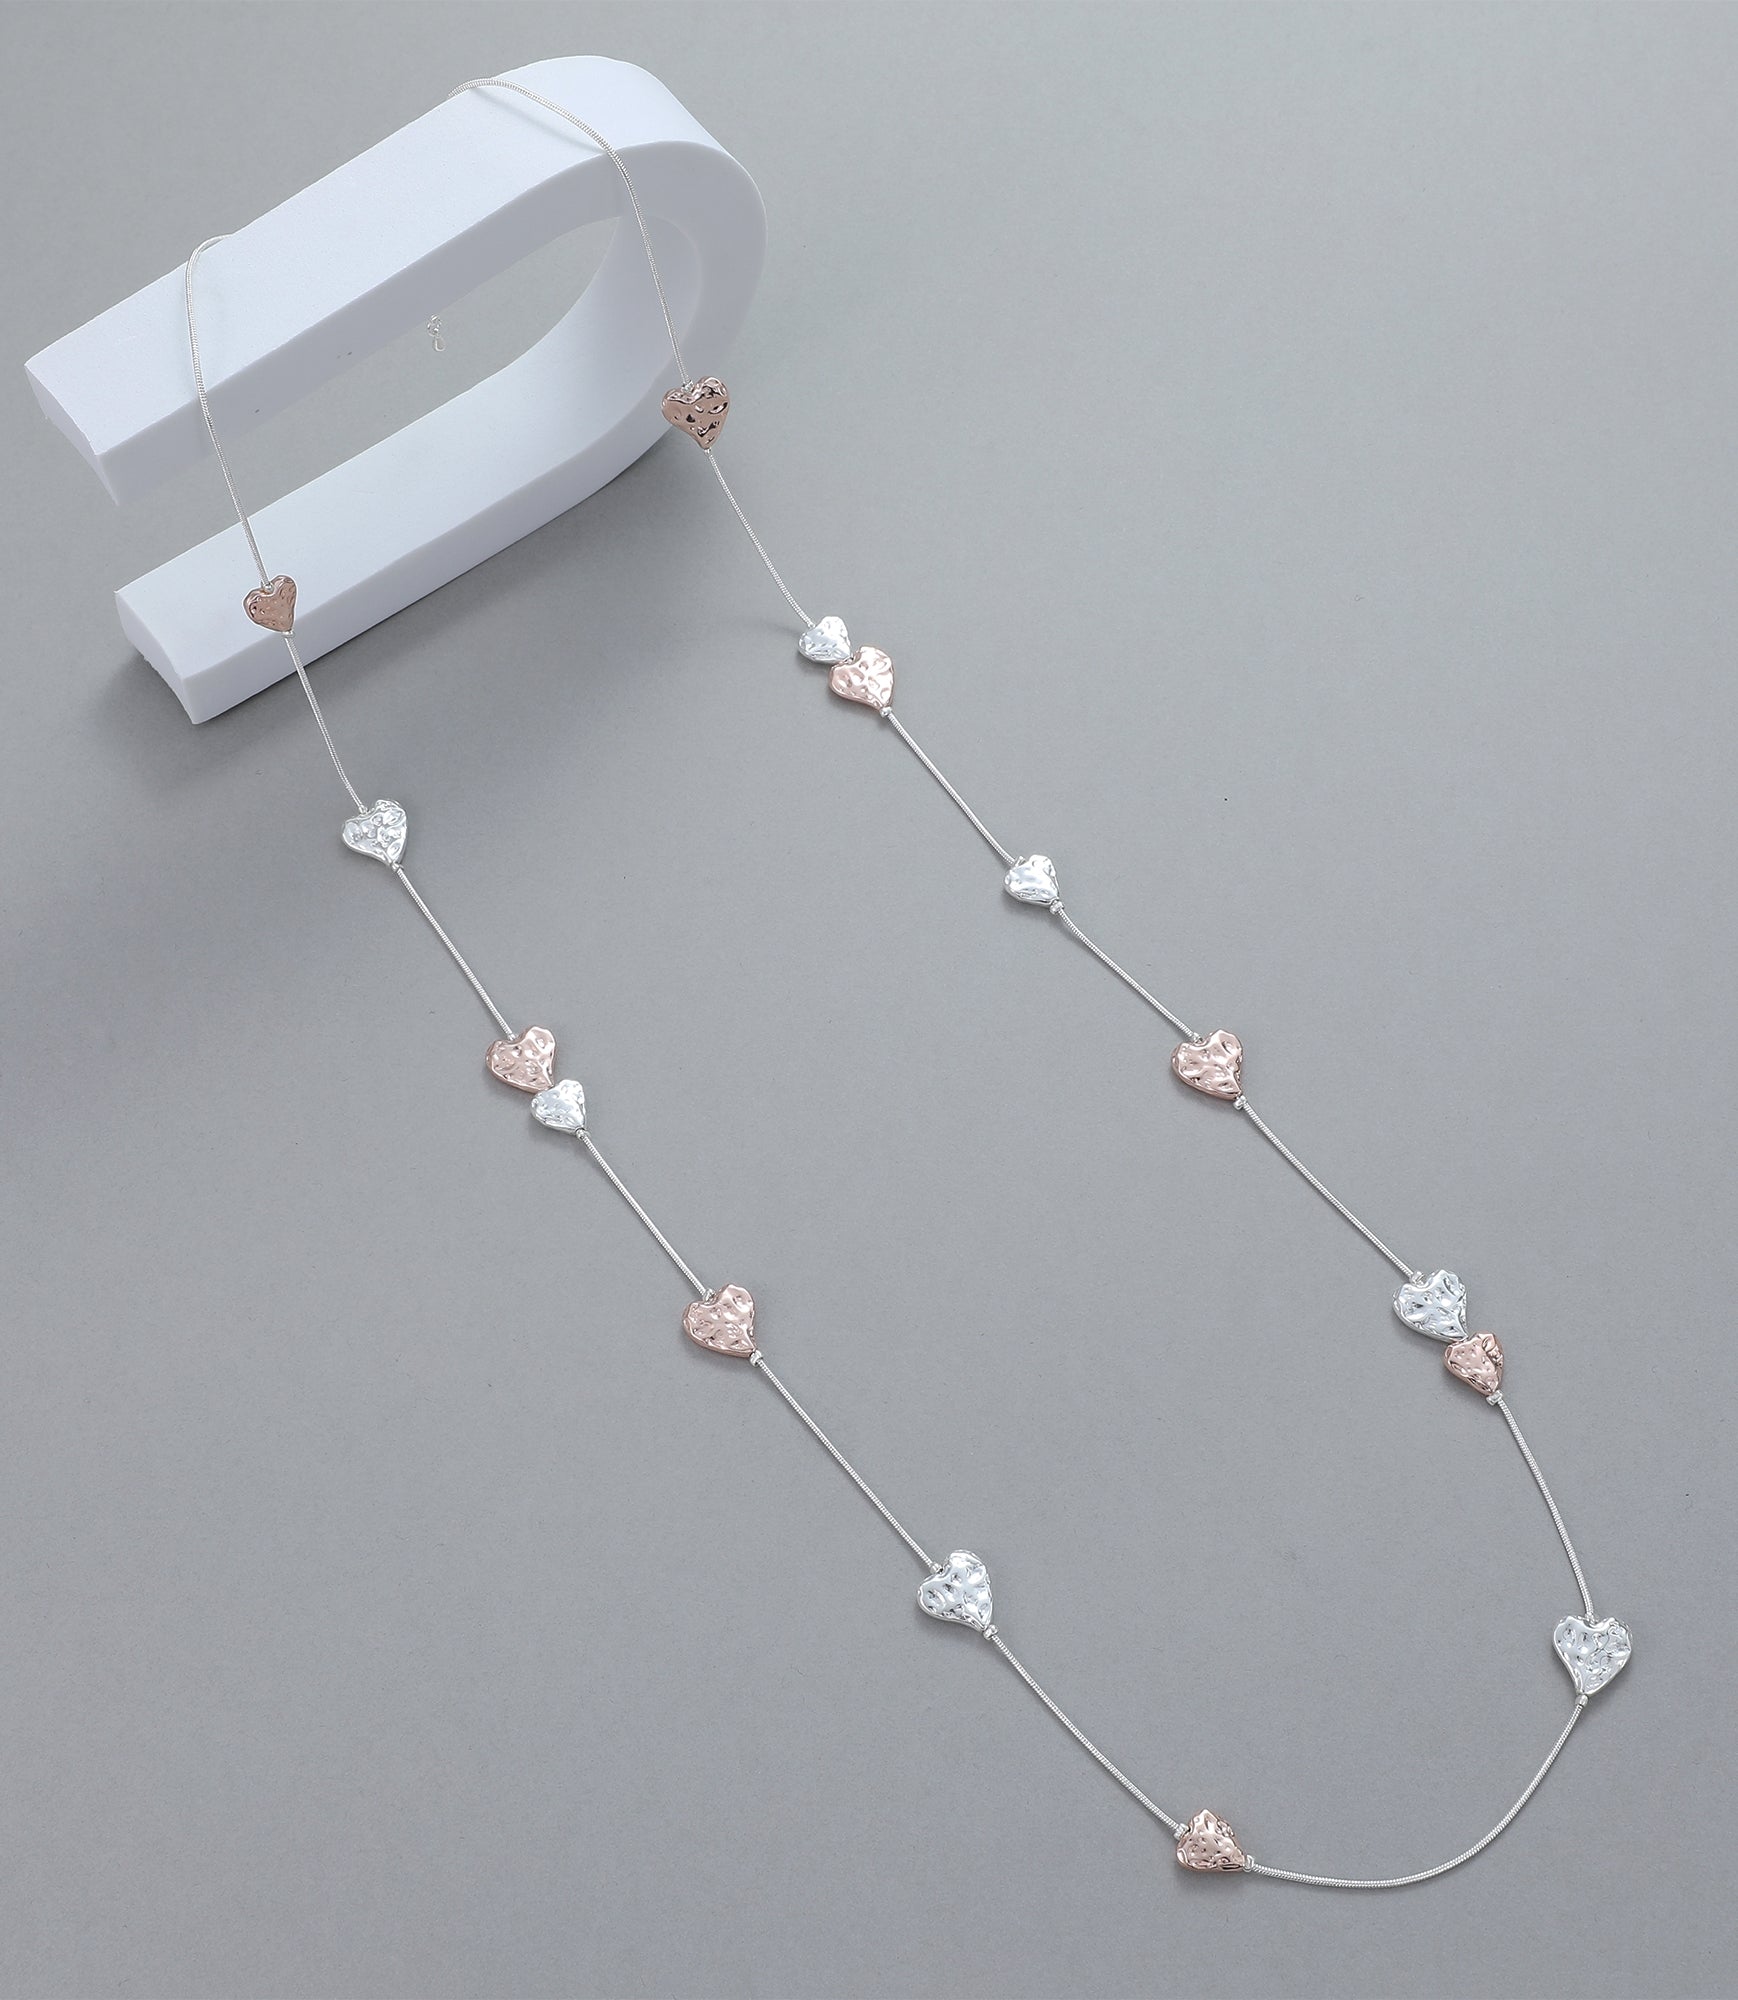 Long necklace, with battered rose gold and silver heart stations - on a silver chain